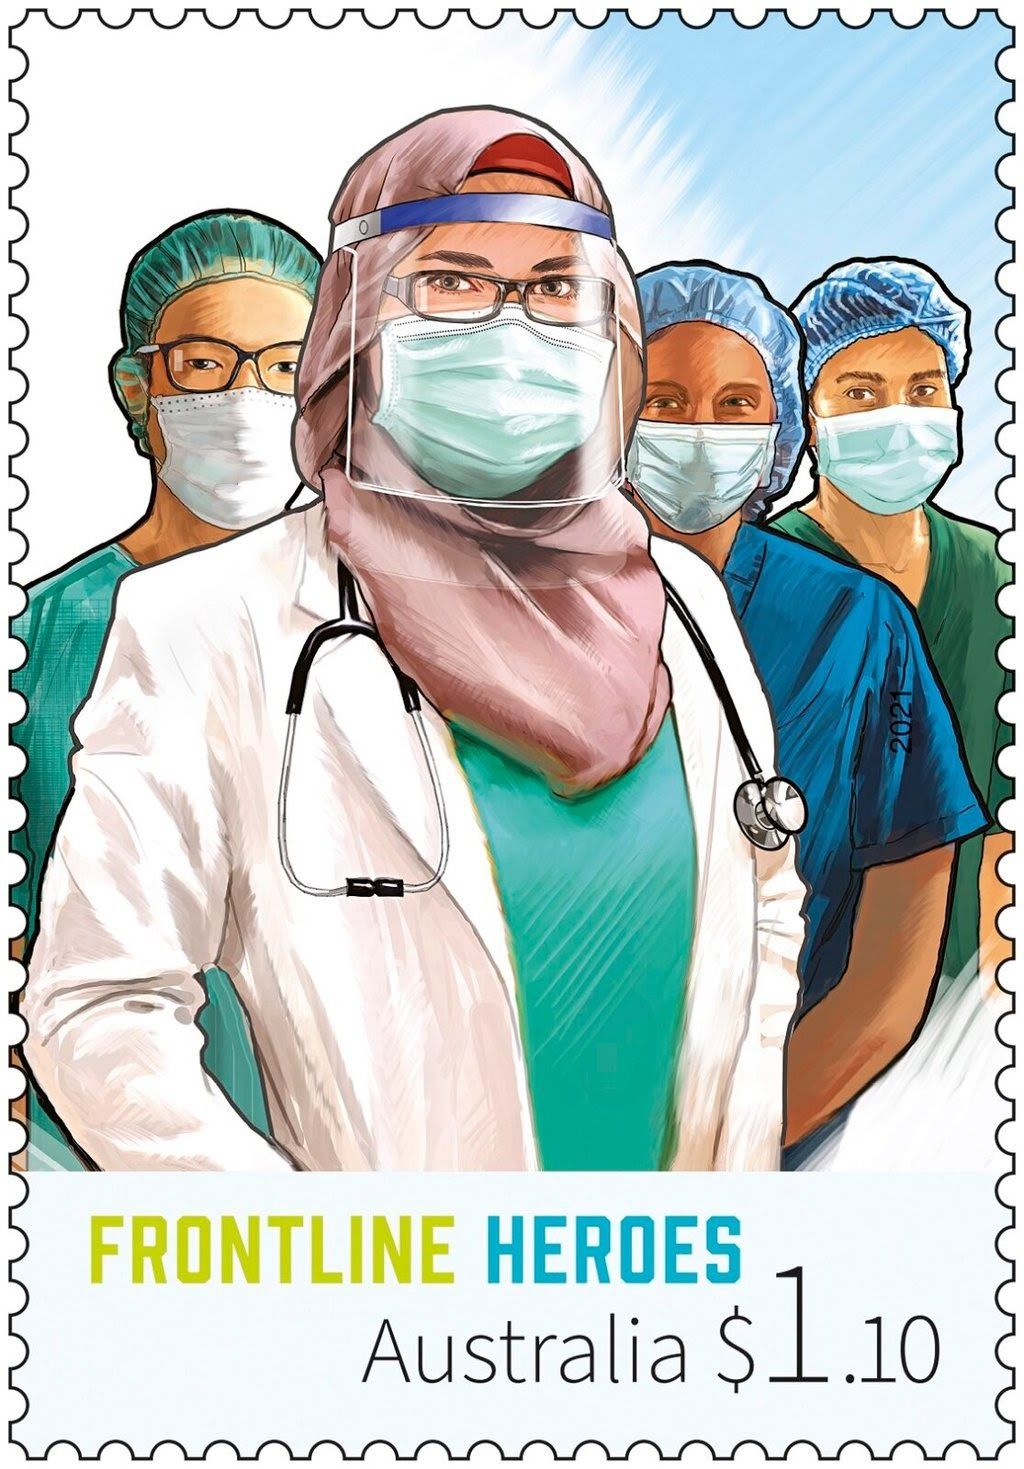 you are currently viewing while france is banning hijab, australia issues a stamp honoring hijabi front line heroes.